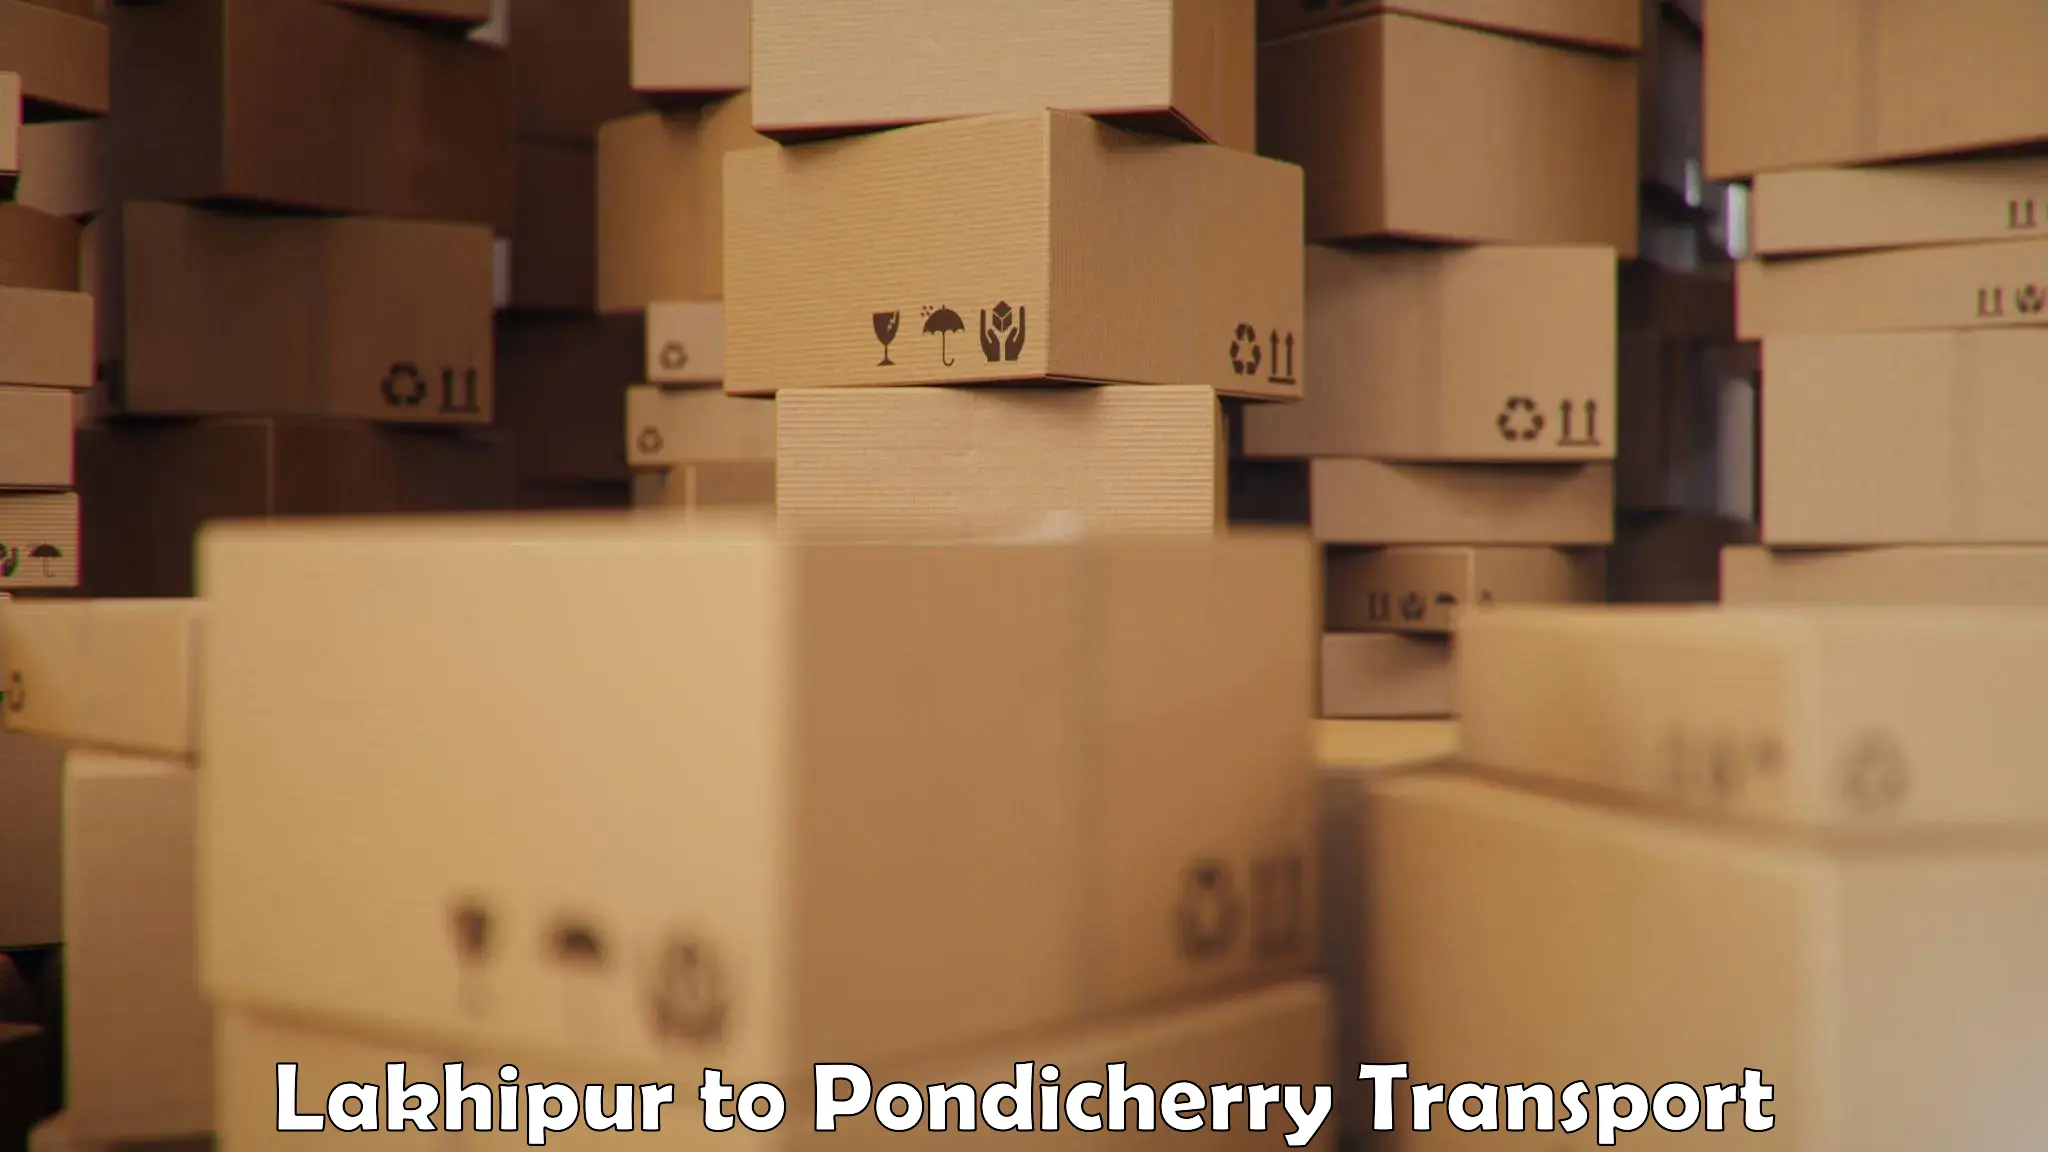 Container transport service Lakhipur to Pondicherry University